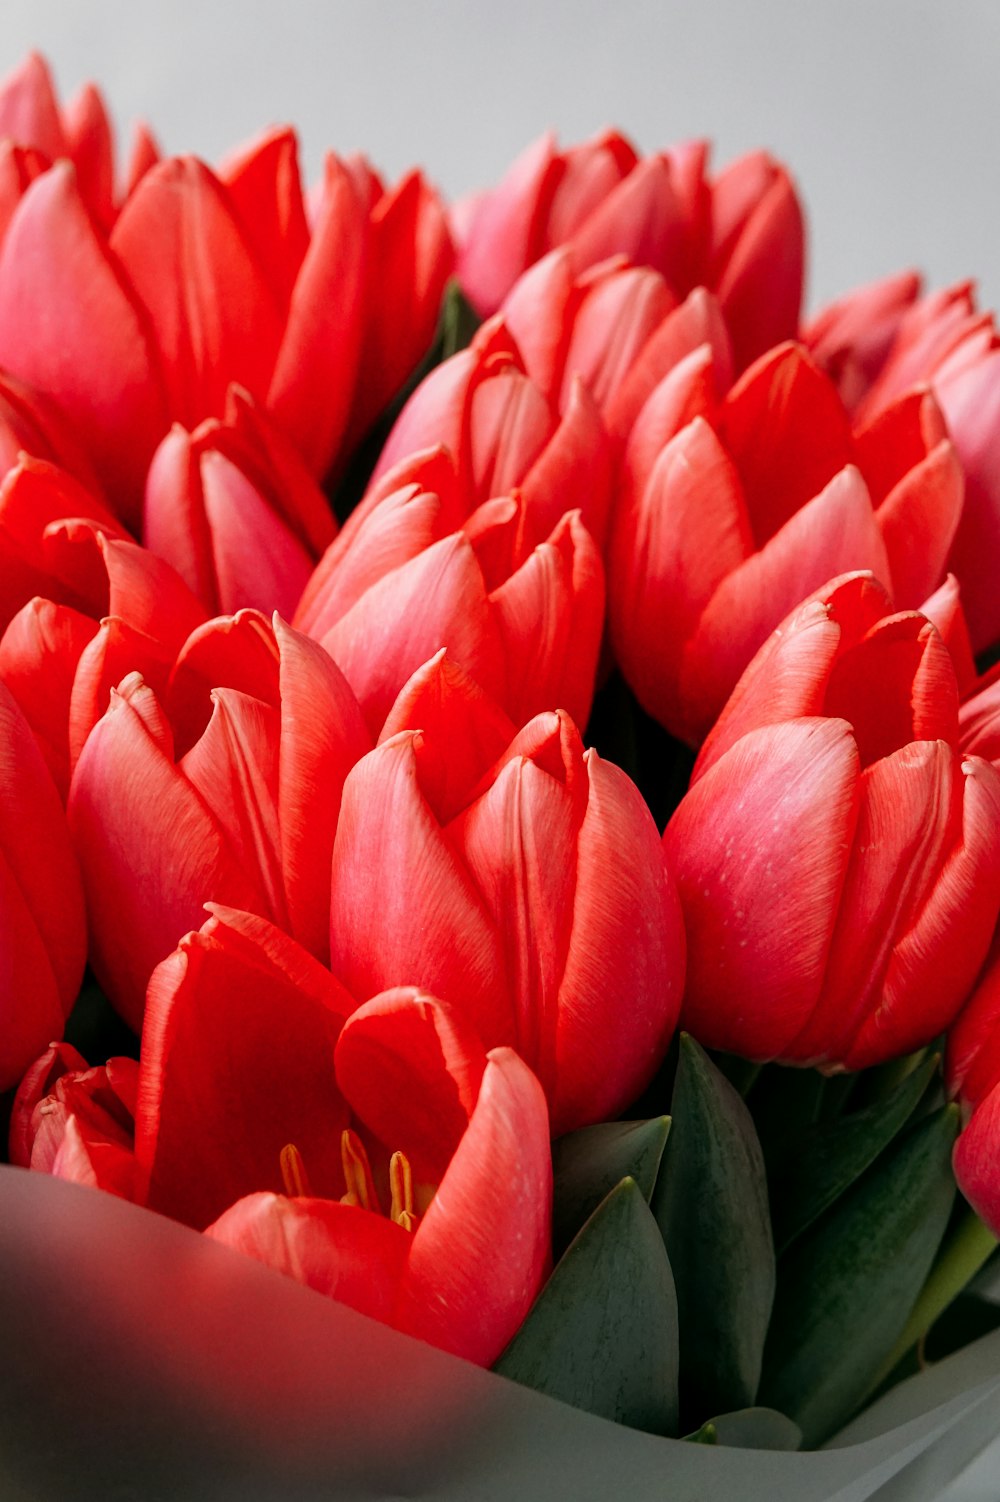 red tulips in bloom during daytime